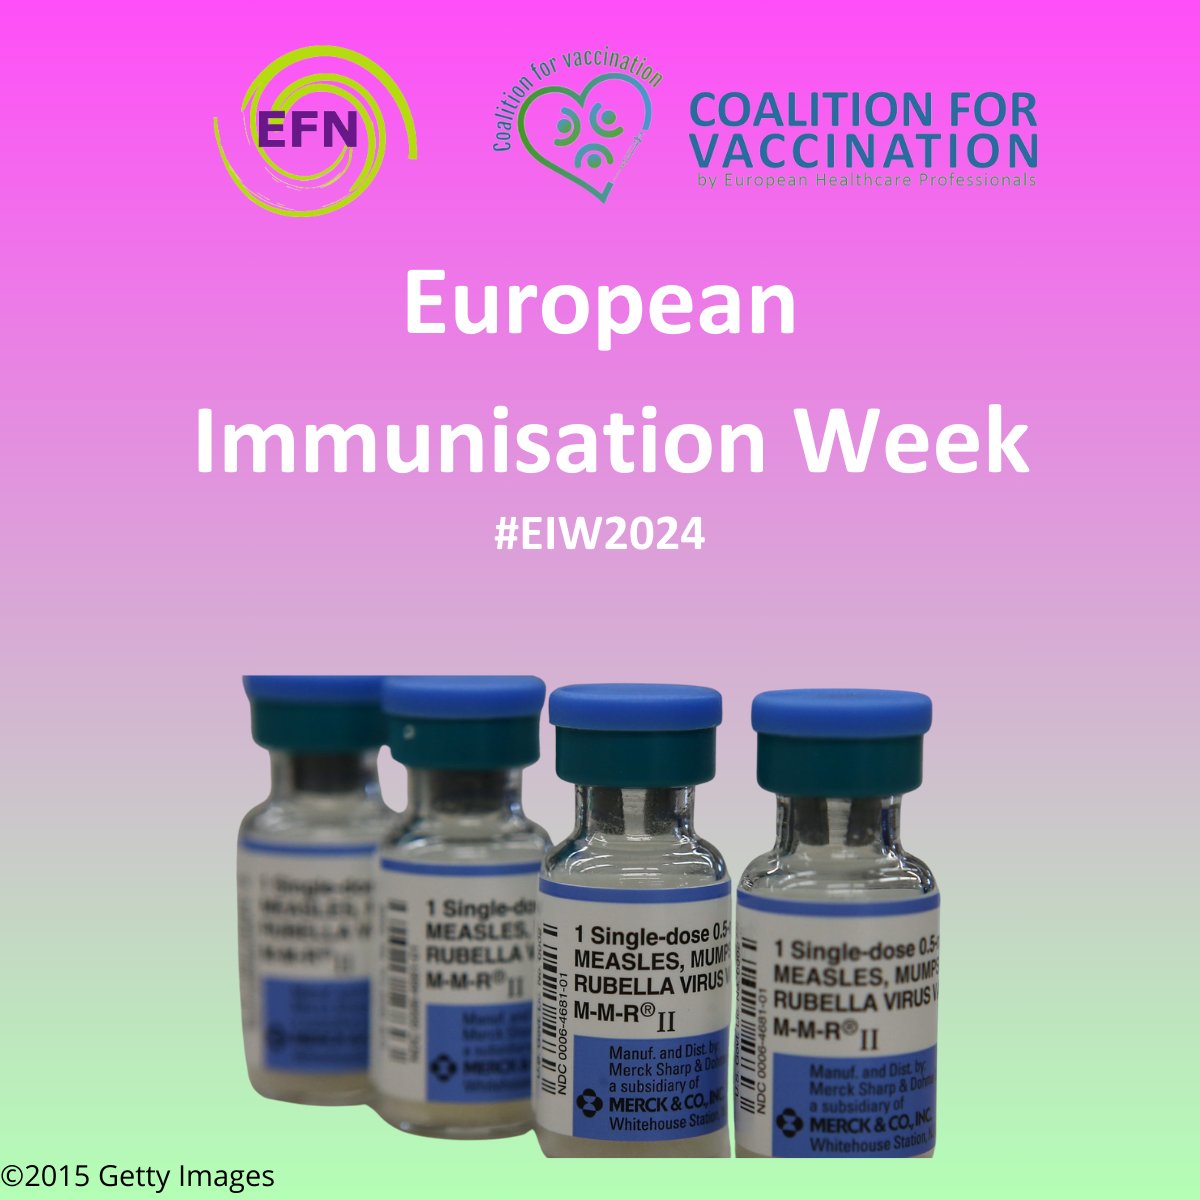 Measles was targeted by the #EPI since the beginning. Despite great progress, recent outbreaks in Europe, have led to deaths due to low vaccination rates. Do not hesitate to get vaccinated! #EFN #EIW2024 #GetVaccinated #Nurses #Prevention #Longlifeforall #EPI #Measles